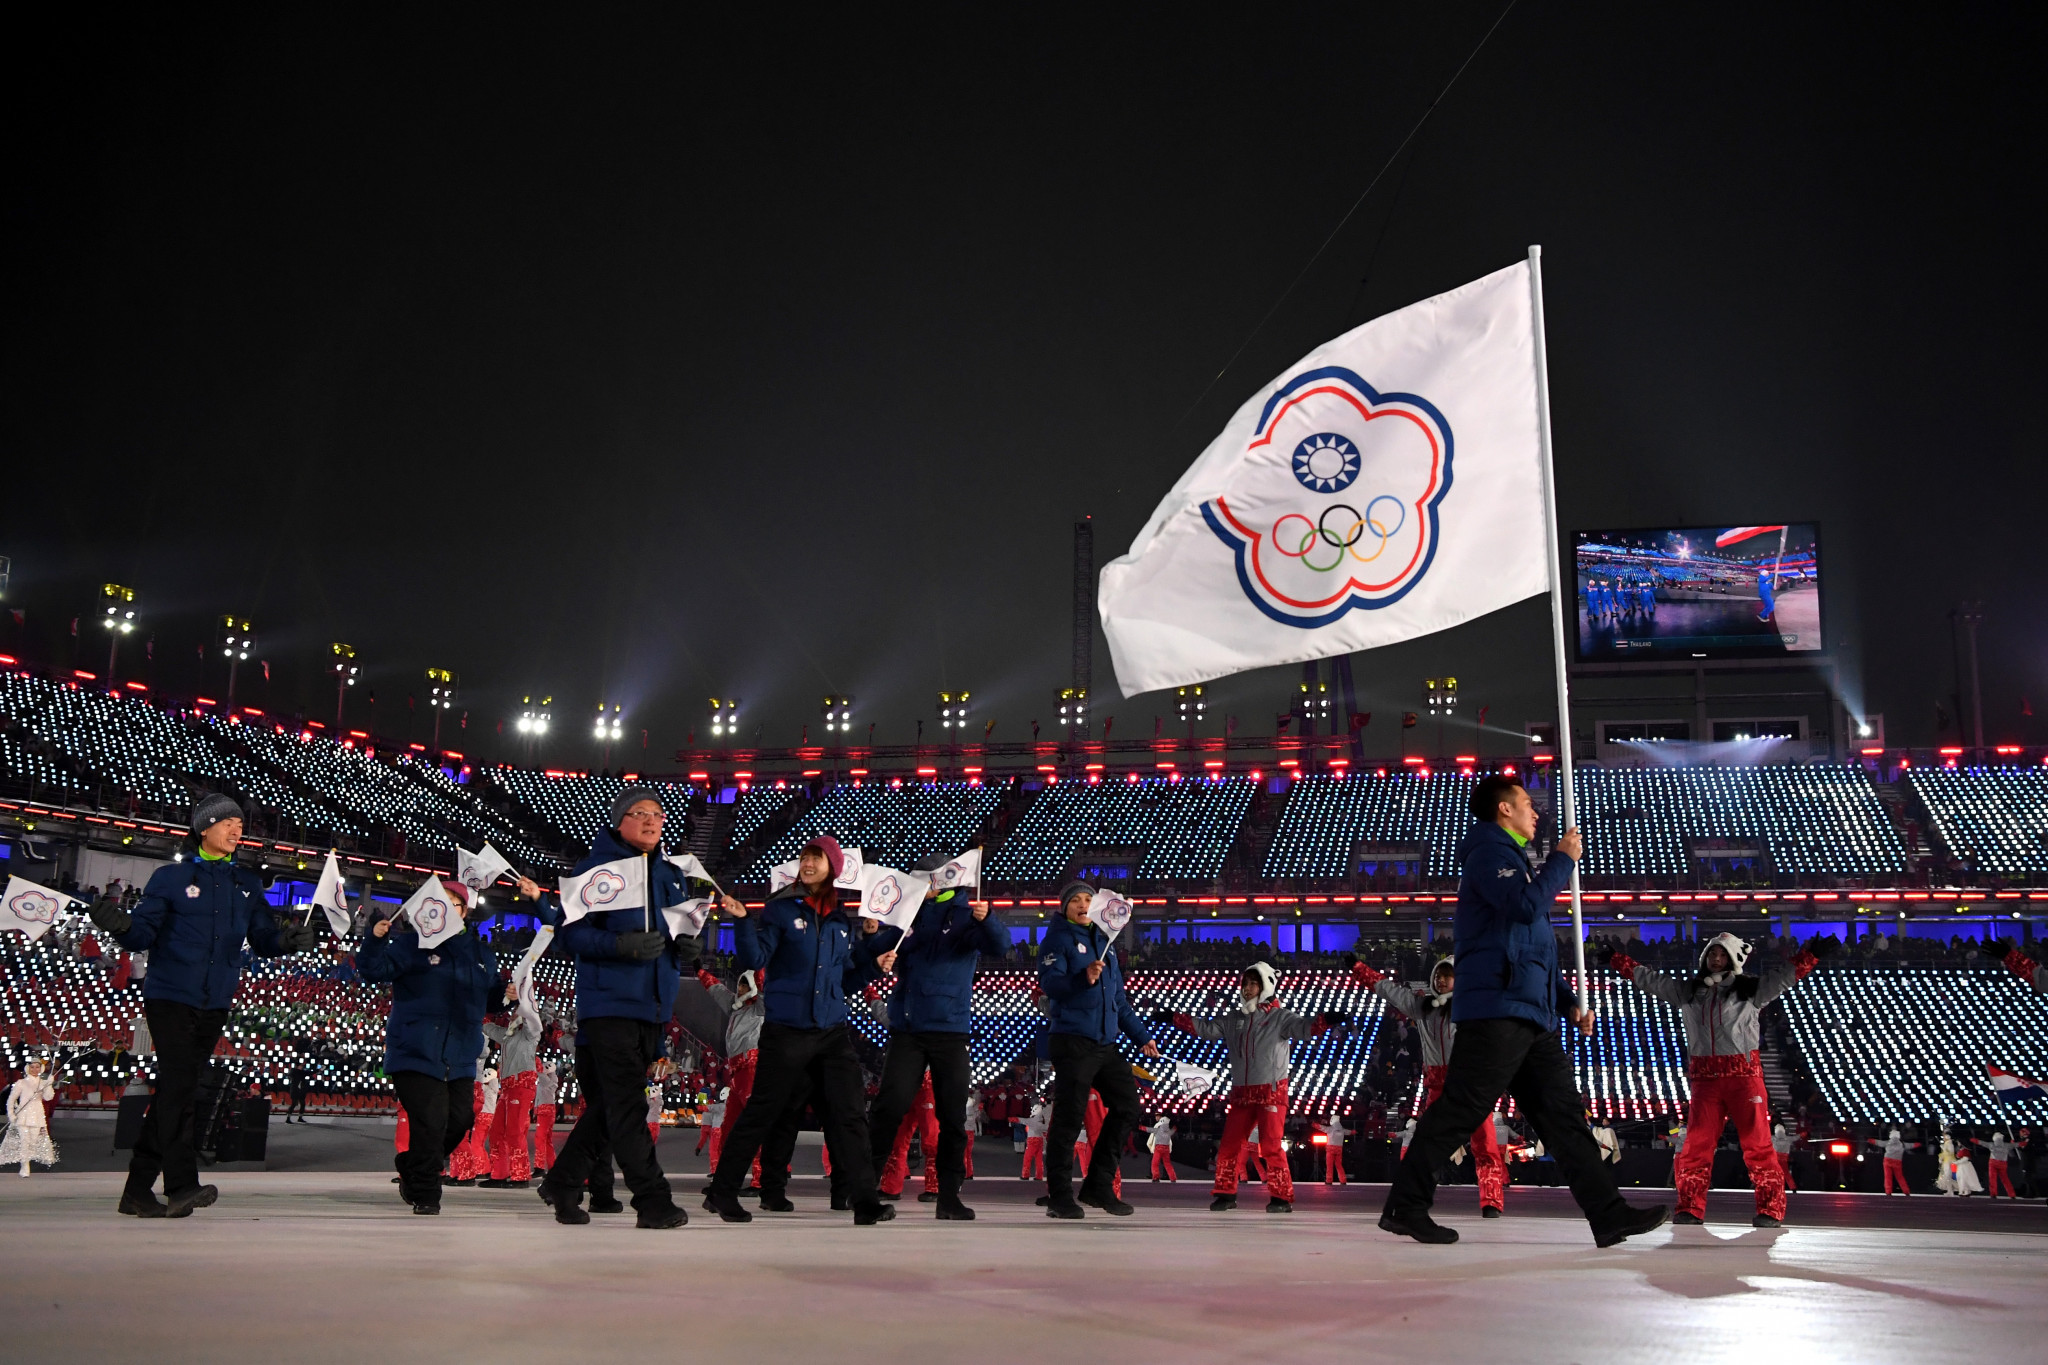 Taiwanese campaigners have submitted more than 520,000 signatures calling for a referendum on whether their national team should compete as "Taiwan" and not "Chinese Taipei" at the Tokyo 2020 Olympic Games ©Getty Images